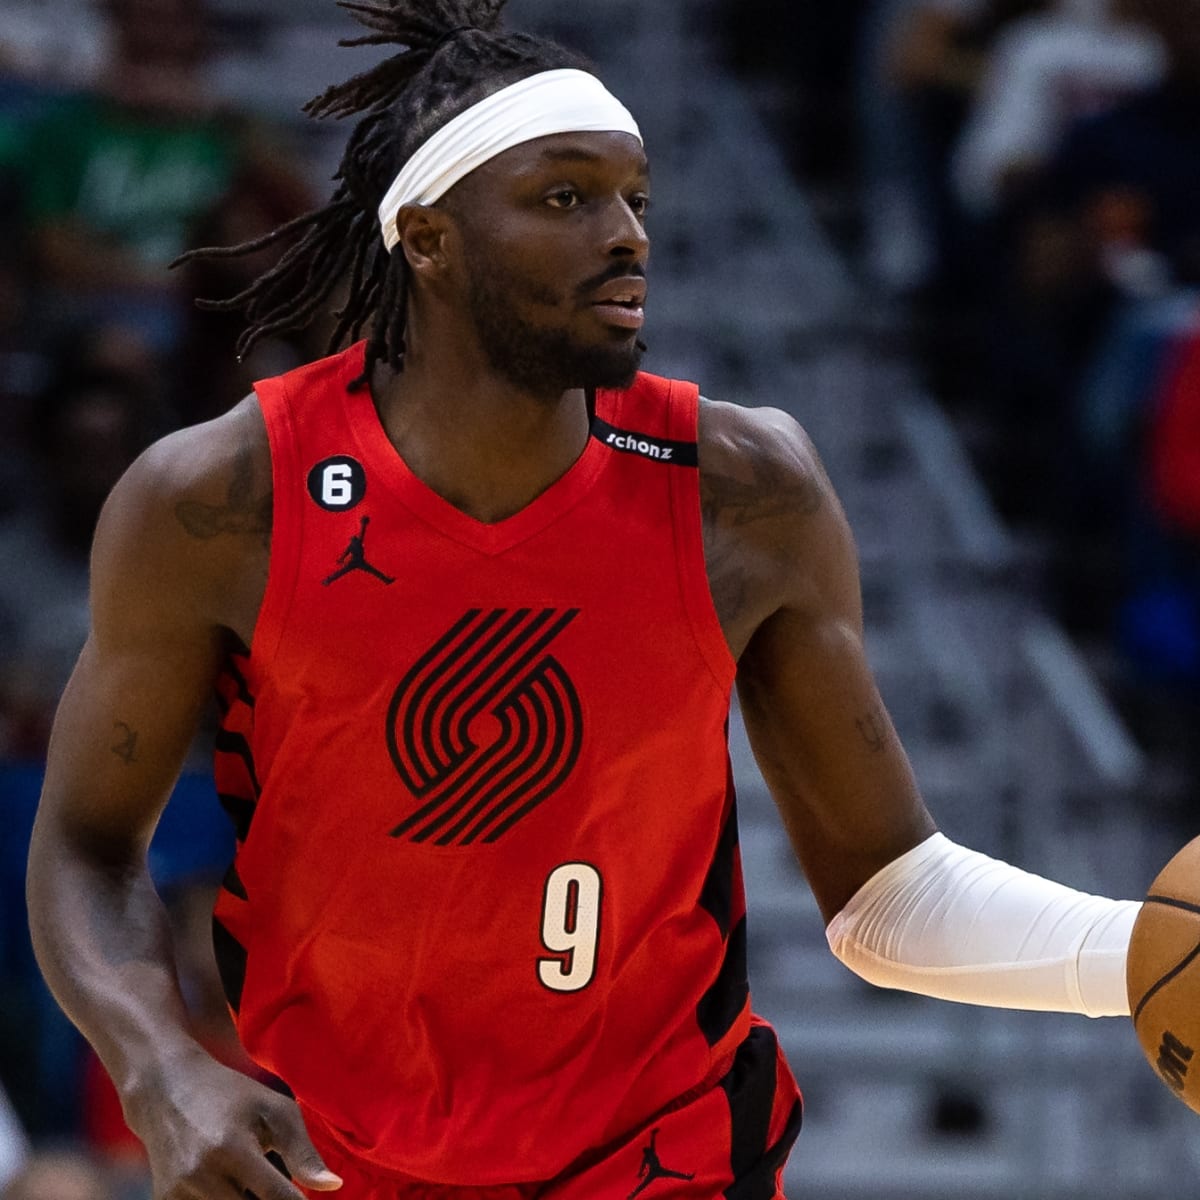 Jerami Grant to sign a $160 million deal with Blazers / News